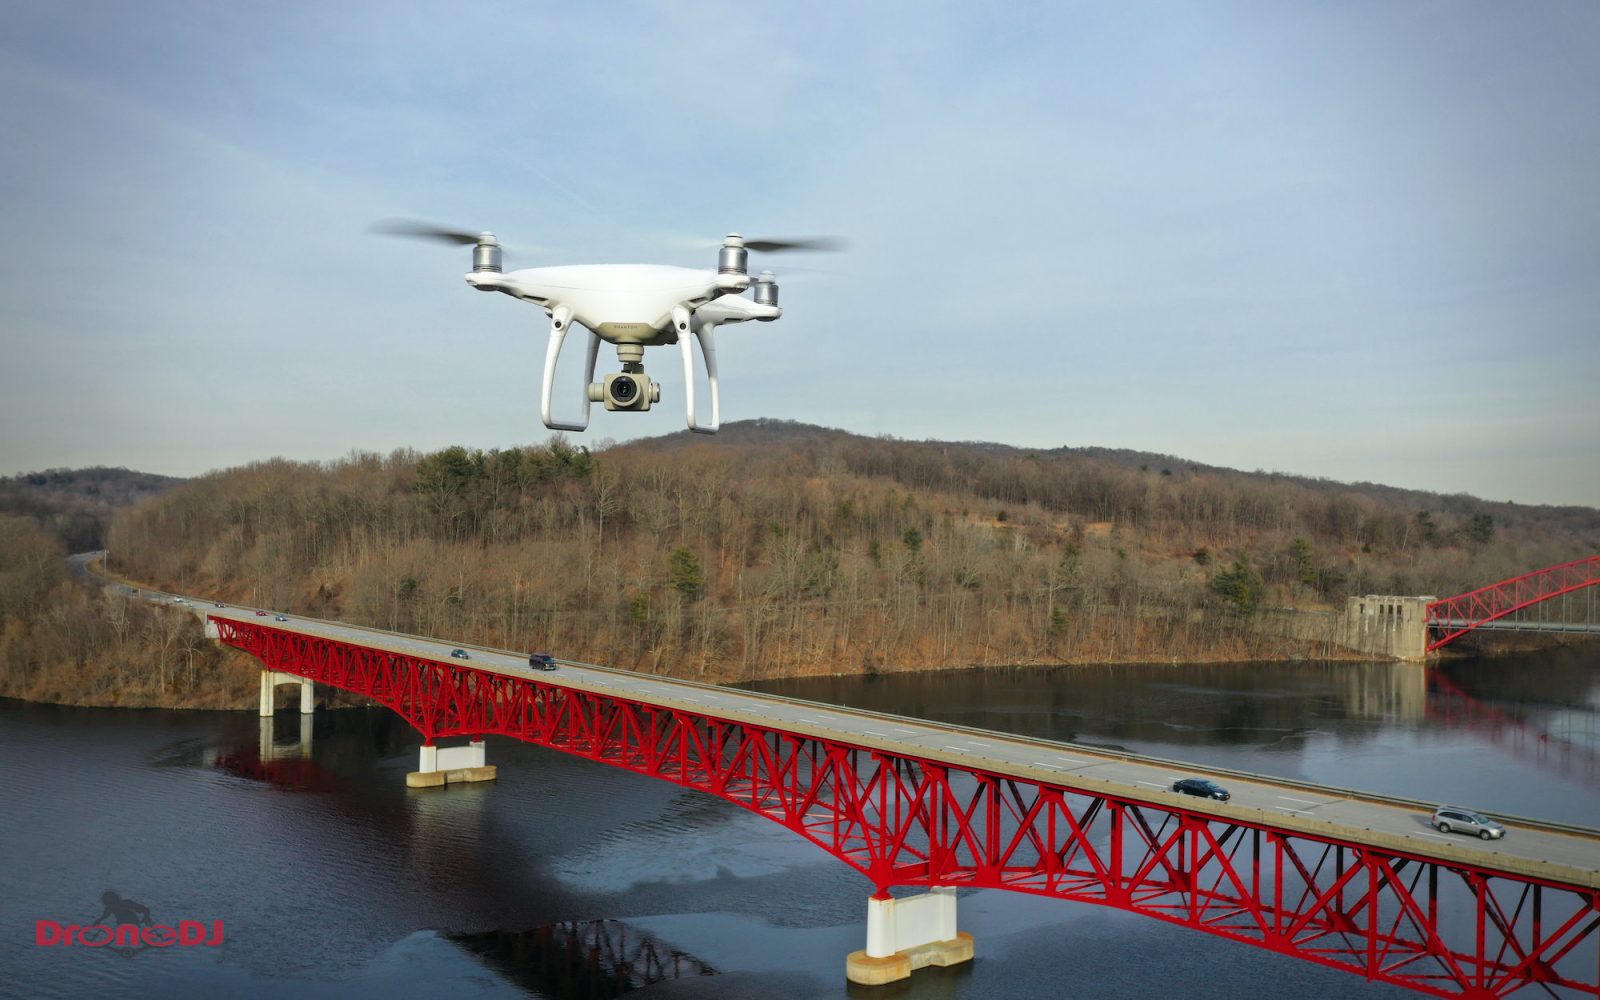 Top ten 10 reasons why the DJI Phantom 4 Pro V2.0 remains a favorite for many drone pilots